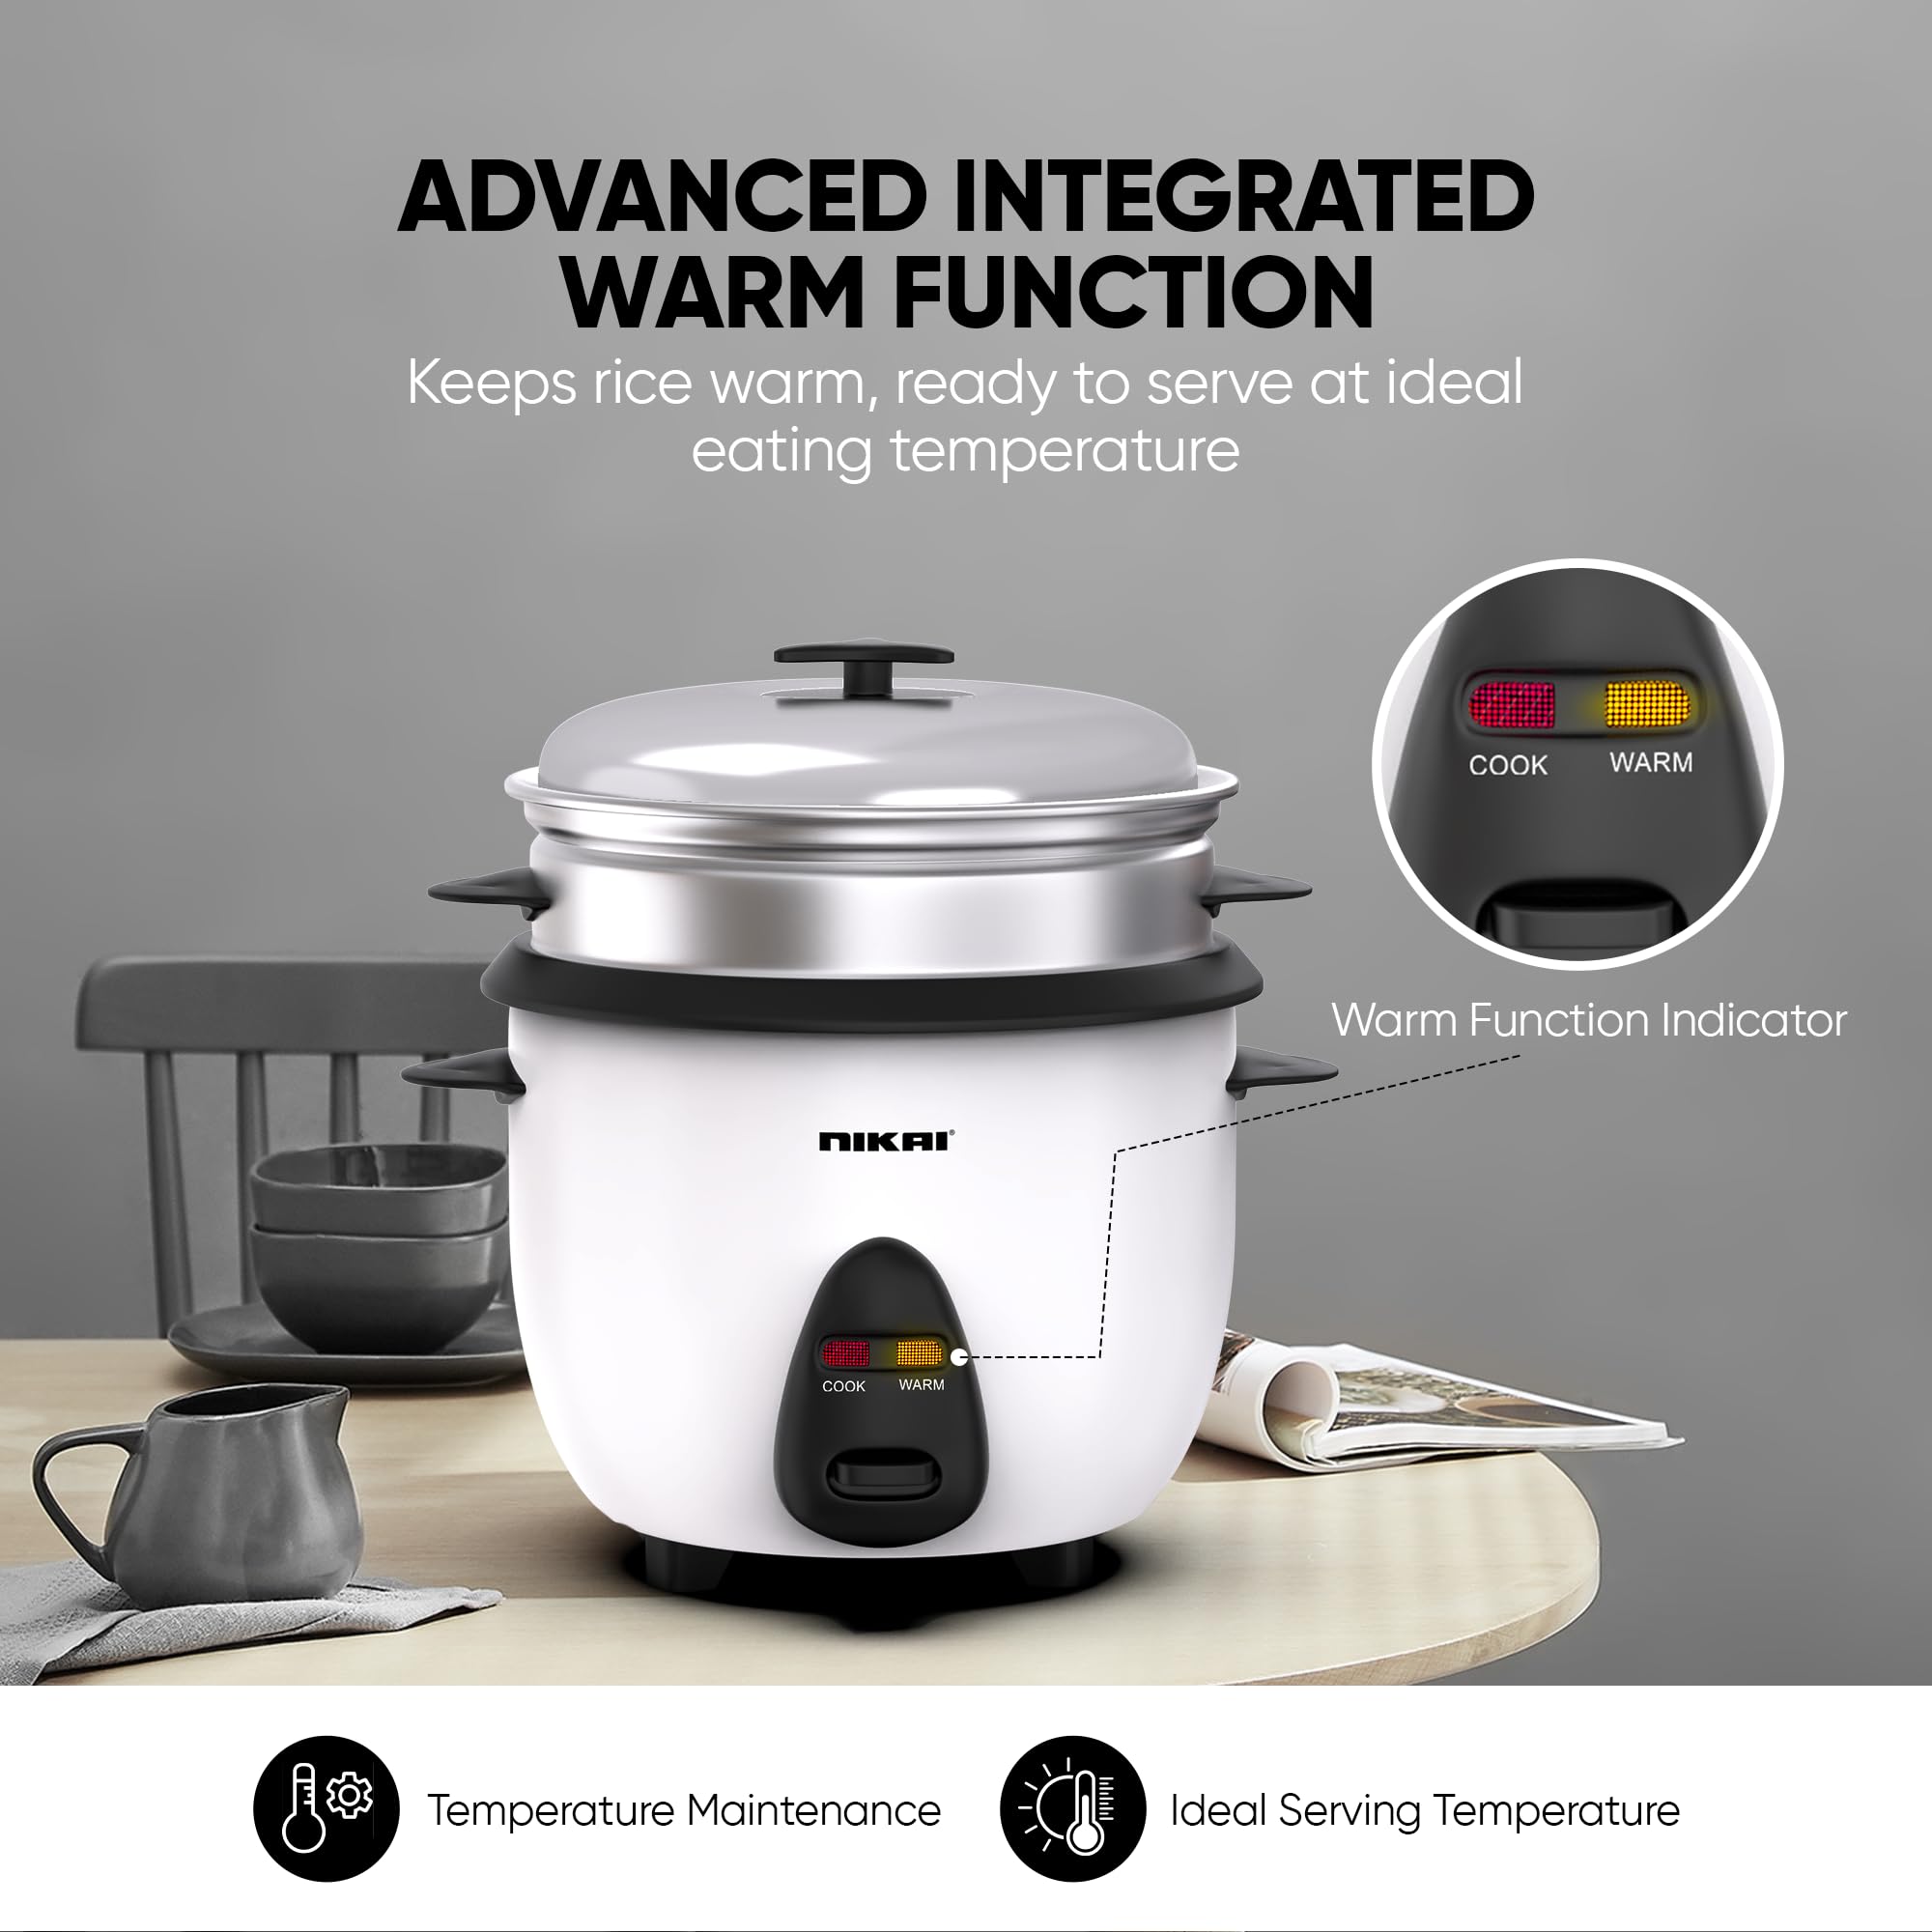 Nikai 400W 1L 2-in-1 Rice Cooker with Steamer, Non-Stick Convenience Pot and Keep Warm Function for Flawless Meals, Detachable Cord, Cook, Steam, and Keep Warm with Ease and Efficiency - NR701A